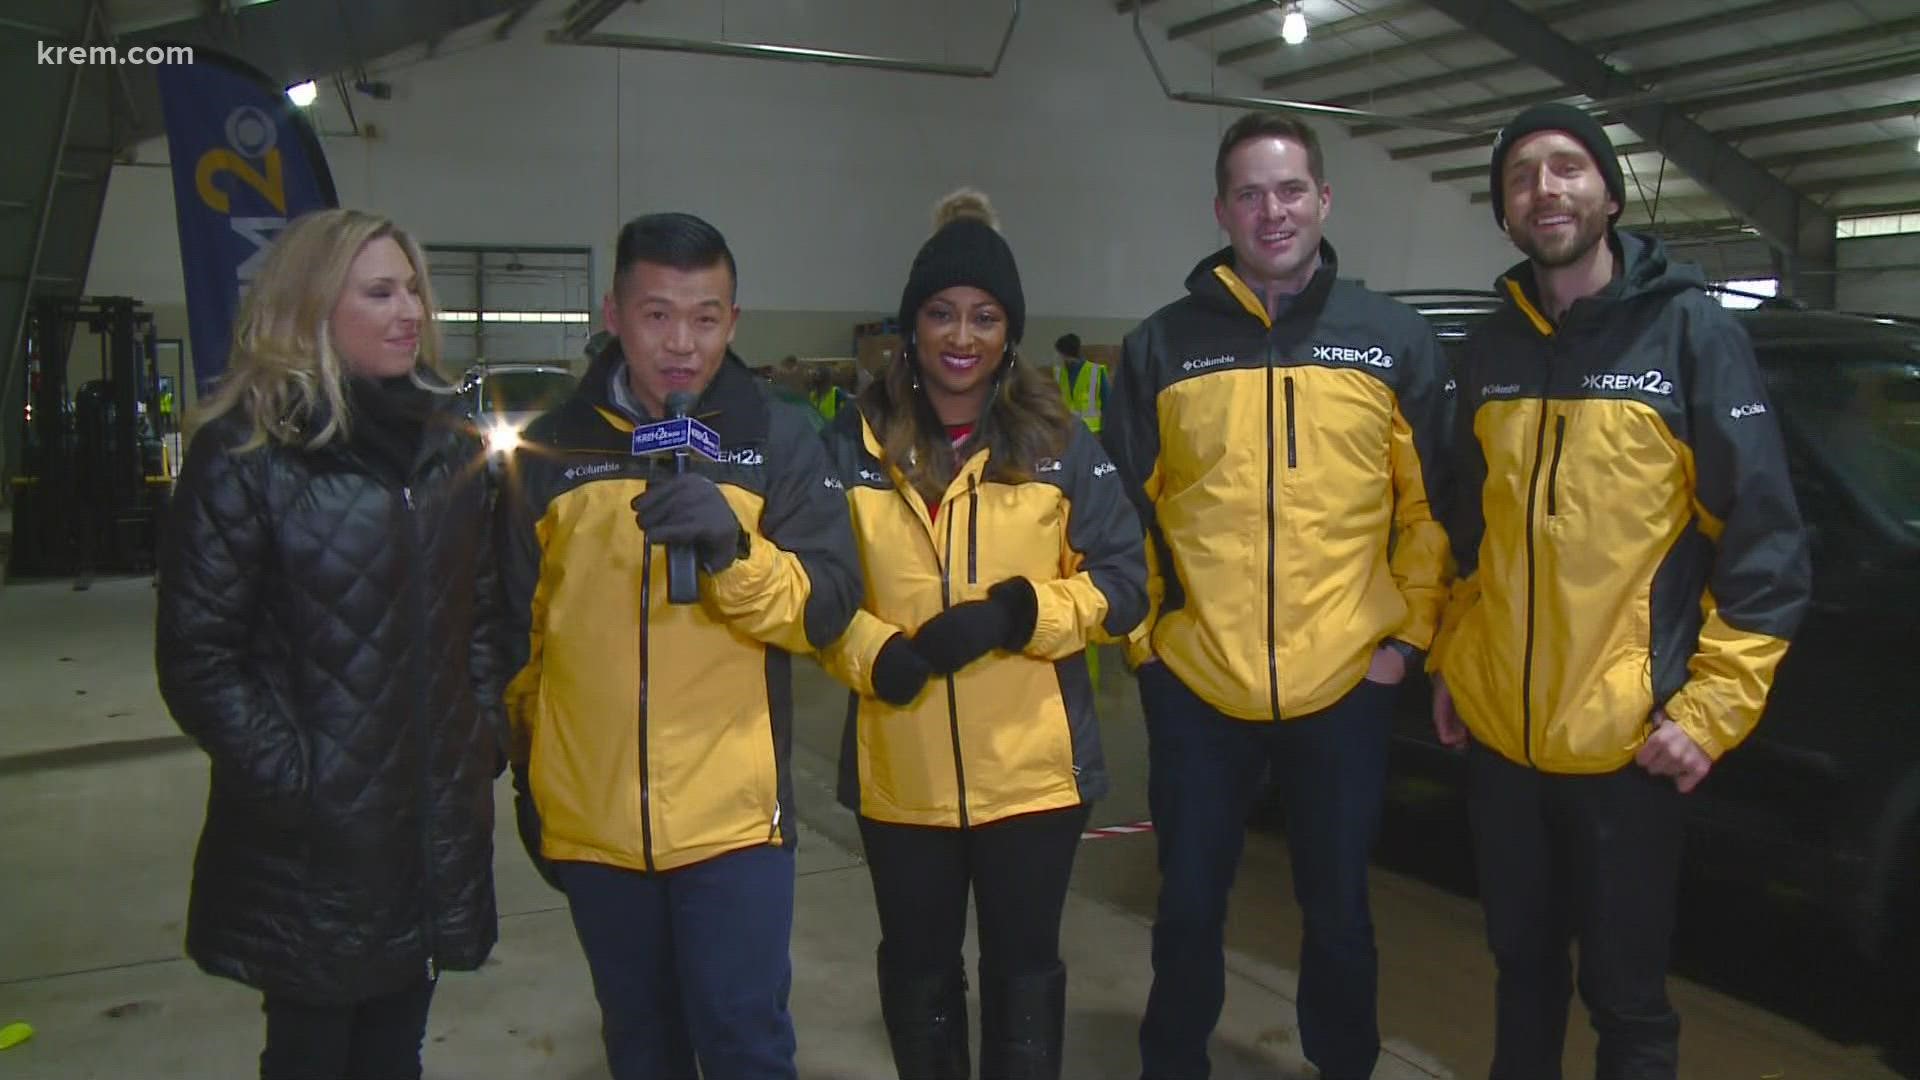 Our KREM 2 News team is live on the Spokane County  Fairgrounds helping out distributing Thanksgiving meals to families. Drive here and get your basket!